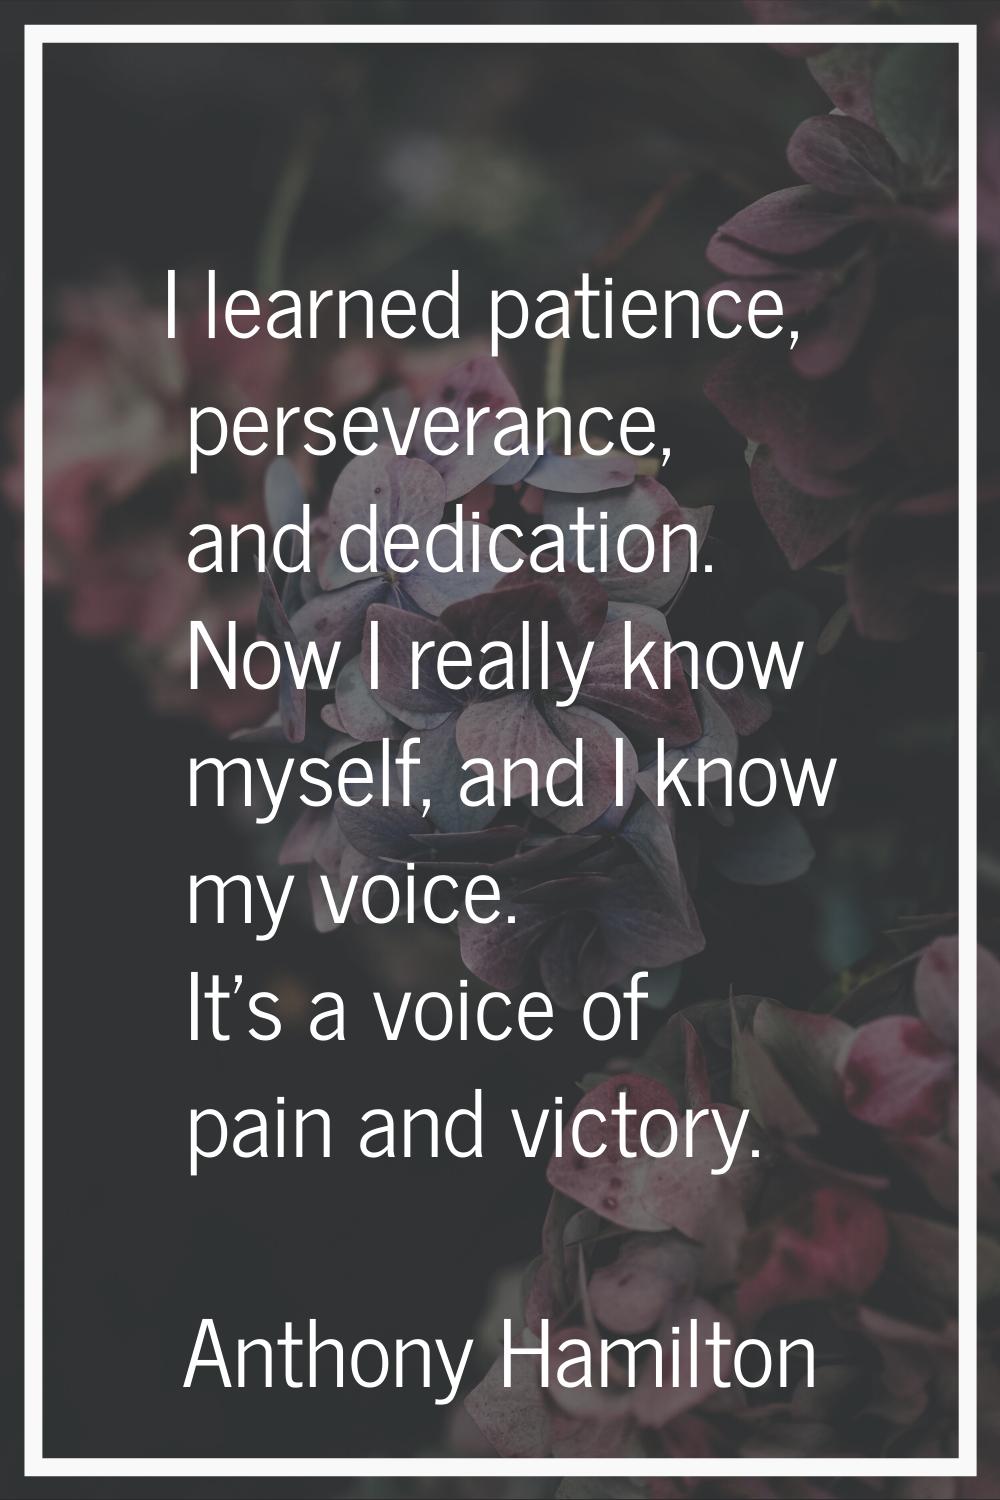 I learned patience, perseverance, and dedication. Now I really know myself, and I know my voice. It